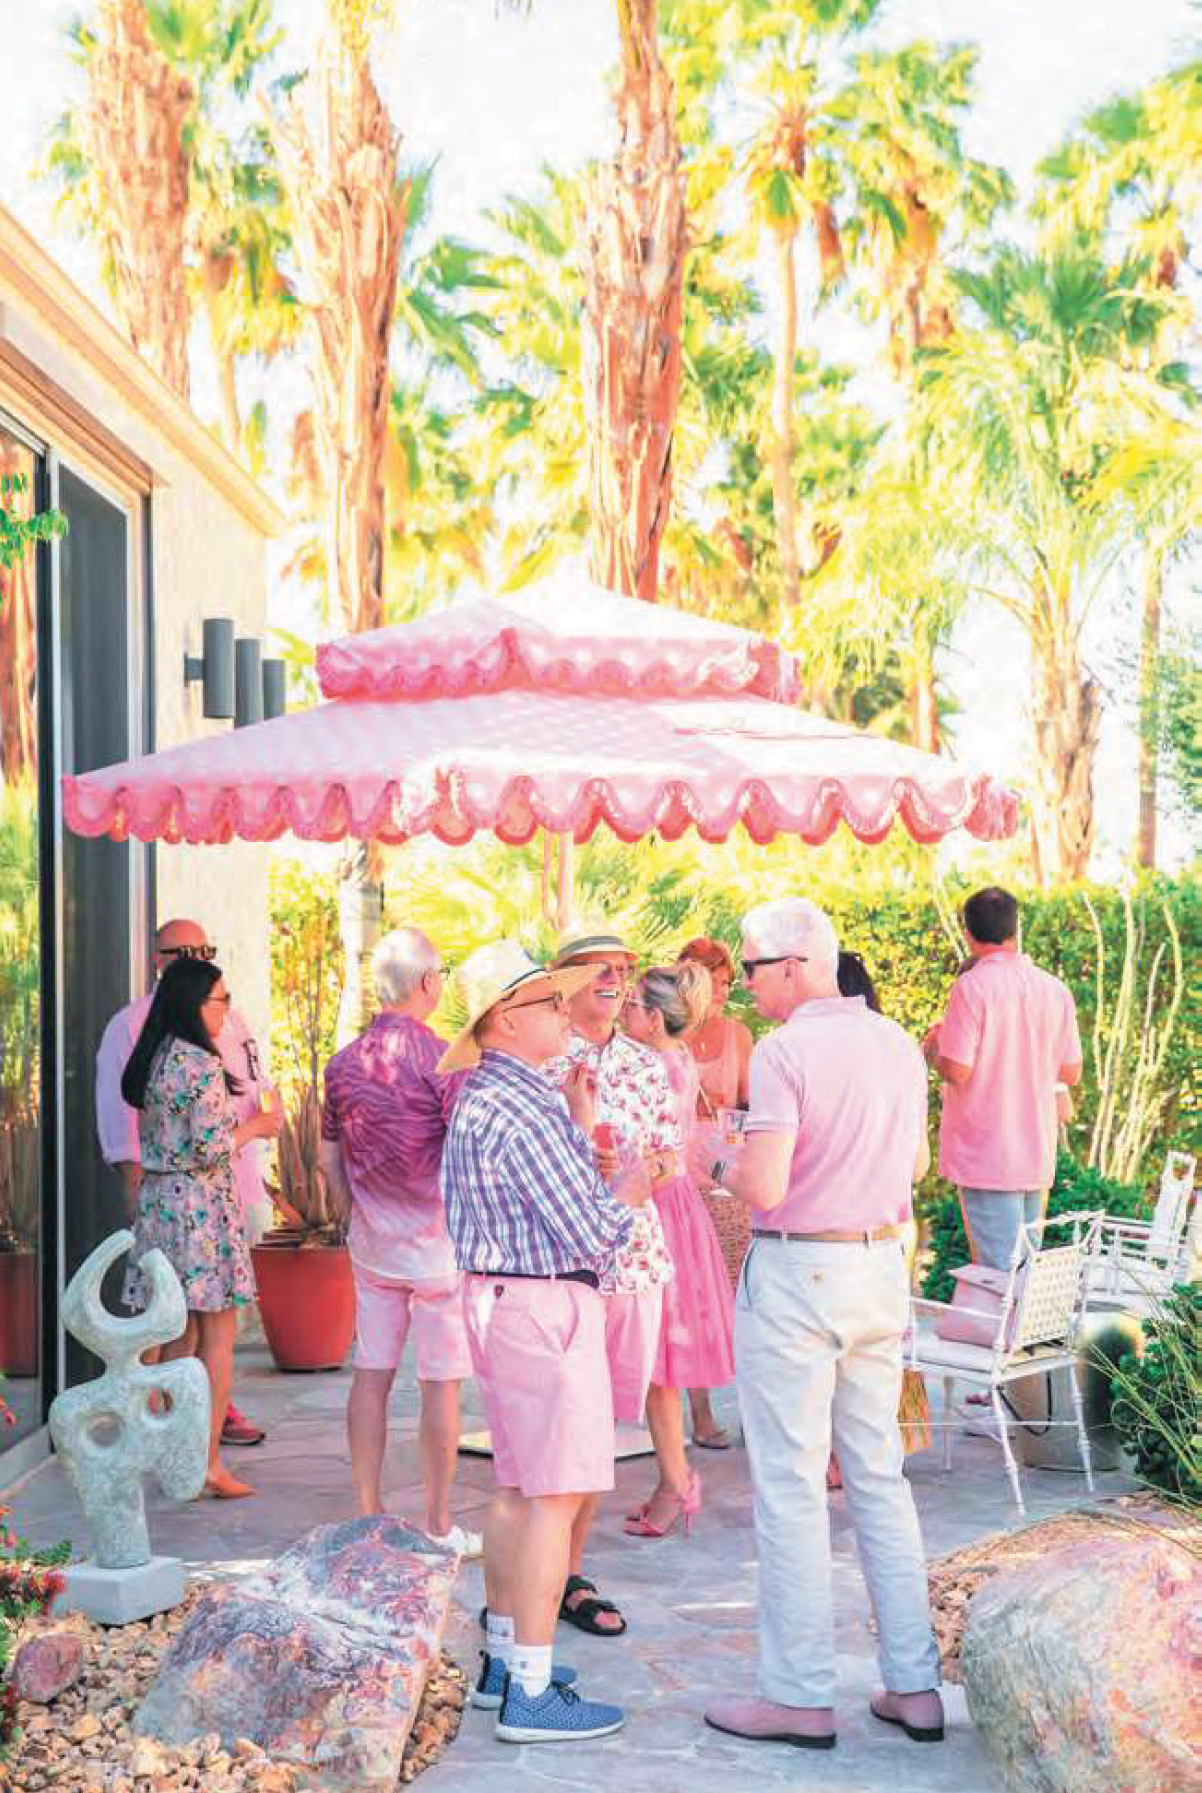 Image of guests at Think Pink Party